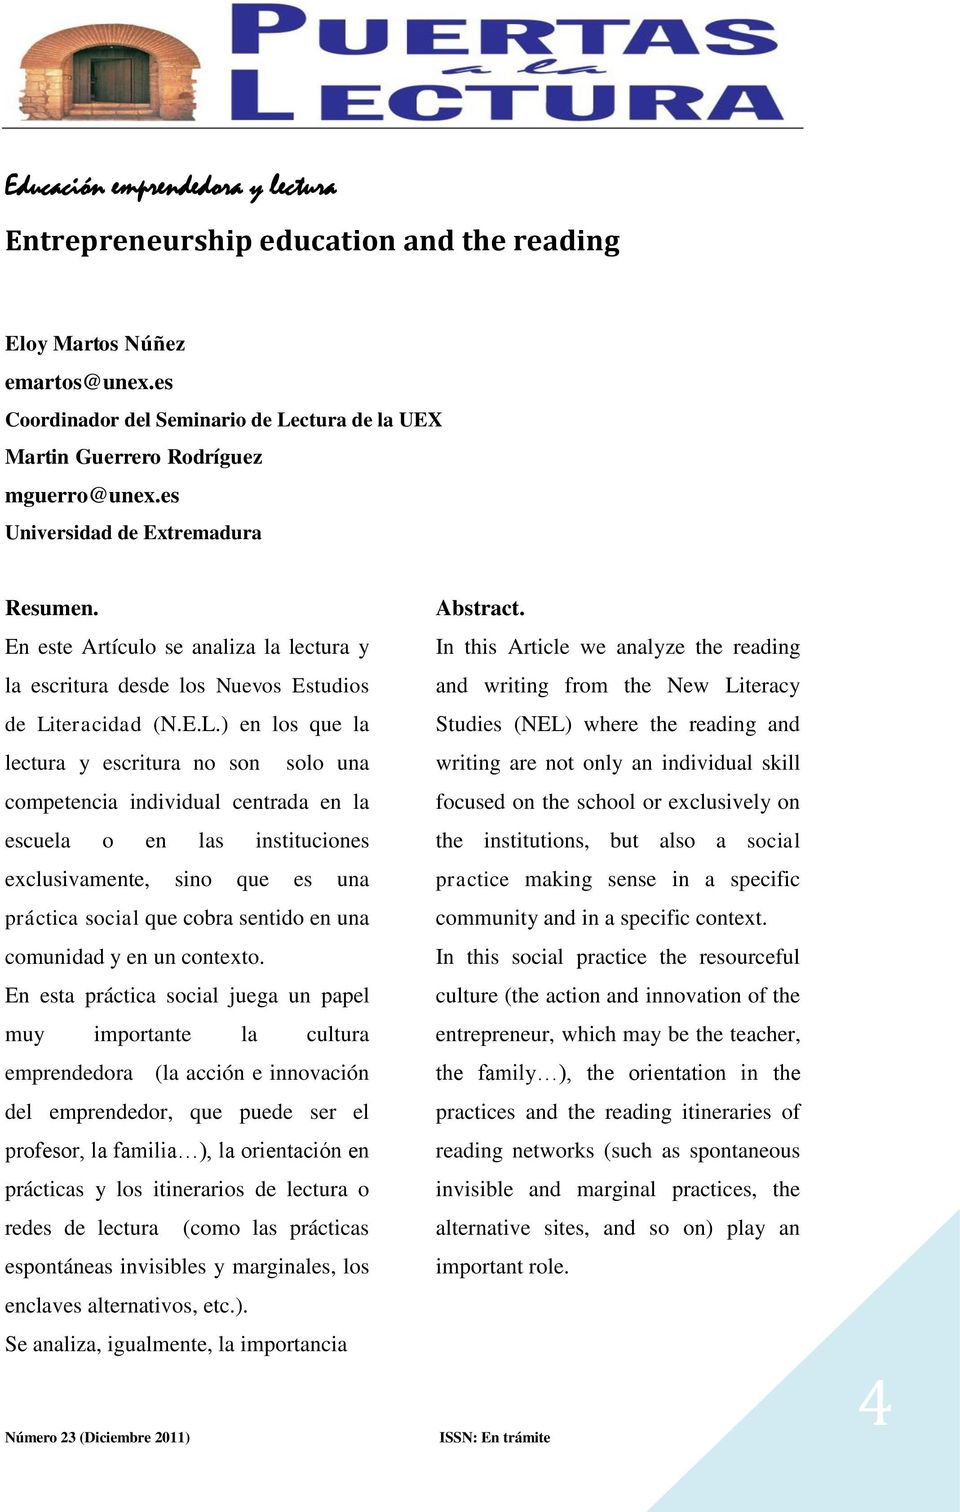 In this Article we analyze the reading and writing from the New Literacy Studies (NEL) where the reading and lectura y escritura no son solo una writing are not only an individual skill competencia